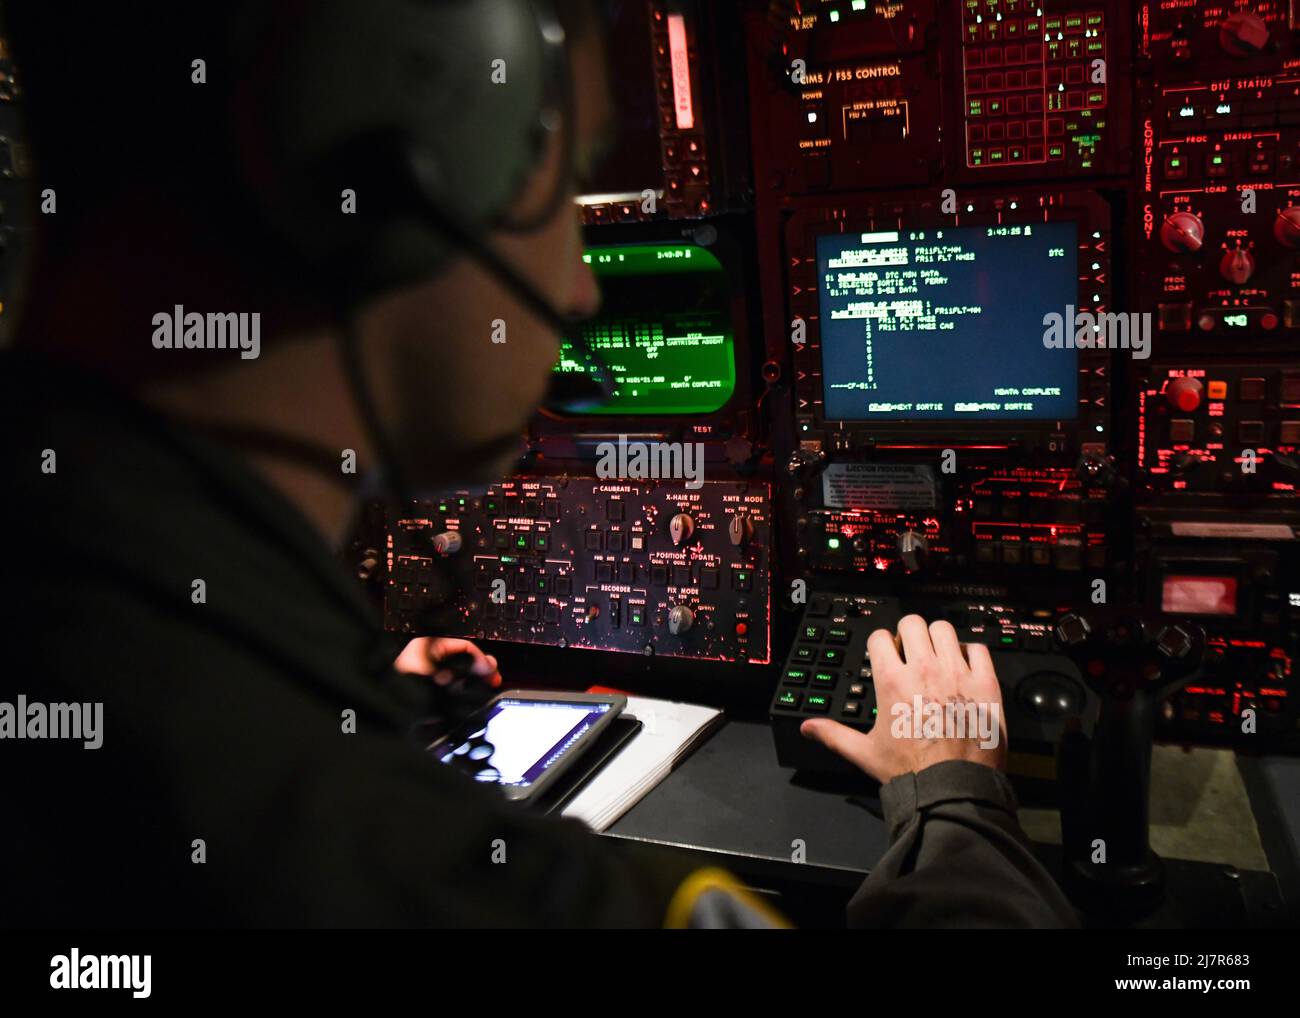 69th Bomb Squadron B-52H Stratofortress Radar Navigator Capt. Brett 'Ohm' Niemantsverdriet conducts B-52H pre-flight procedures on May 2, 2022, at Minot Air Force Base, North Dakota. The B-52H can carry and employ a large array of weapons, including gravity bombs, cluster bombs, precision-guided missiles, and joint direct attack munitions. (U.S. Air Force photo by Senior Airman Michael A. Richmond) Stock Photo